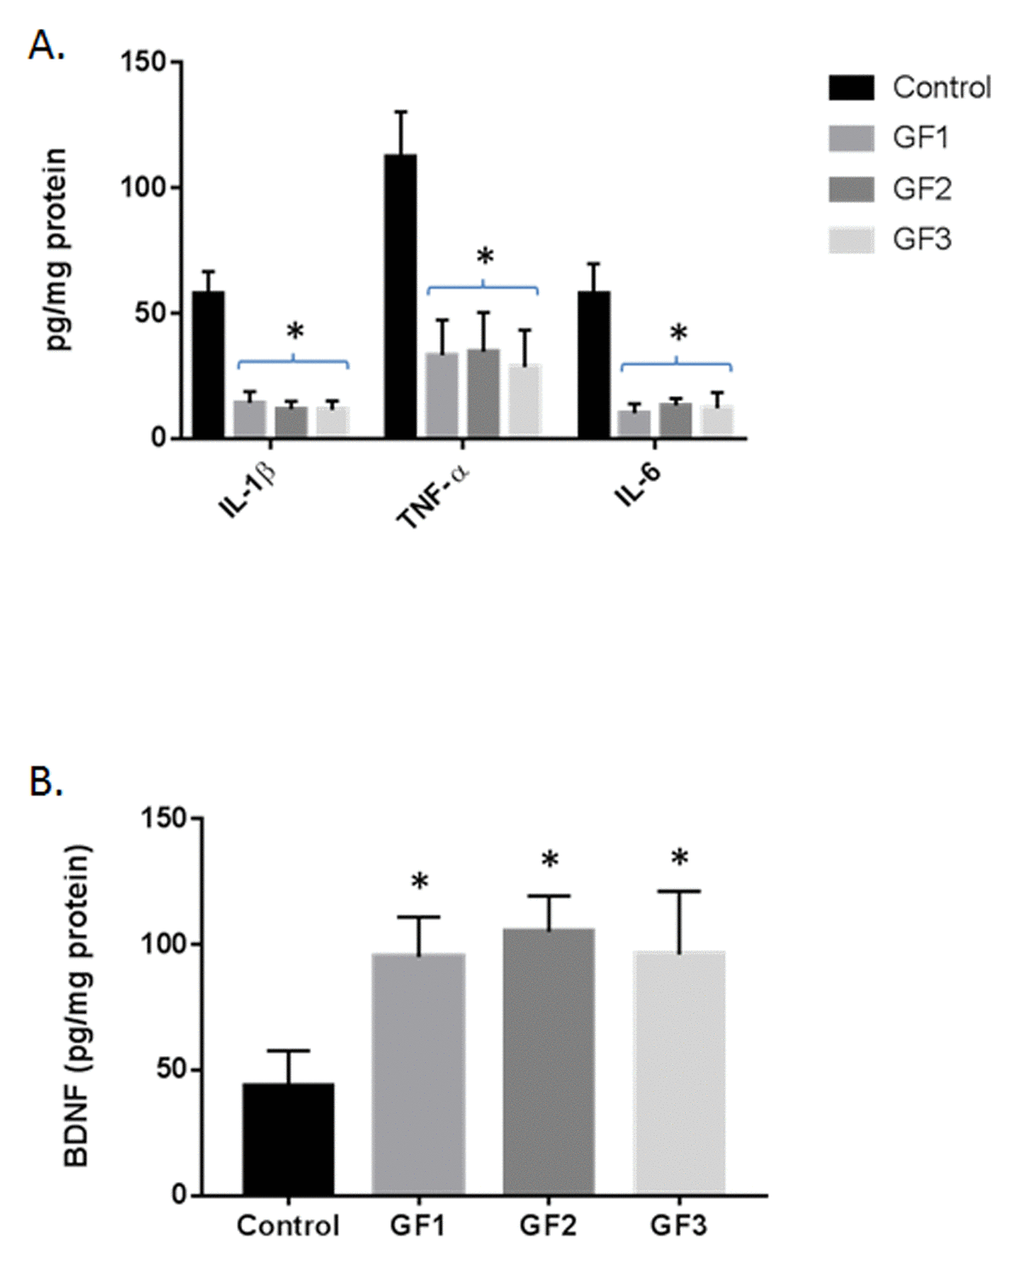 Cytokine and BDNF levels in the brains of aged rats. (A) IL-1β, TNF−α and IL-6 were measured in the brains of aged rats subjected to control or GF diets. (B) BDNF was measured in the brains of aged rats subjected to control or GF diets. N = 20 per group. P